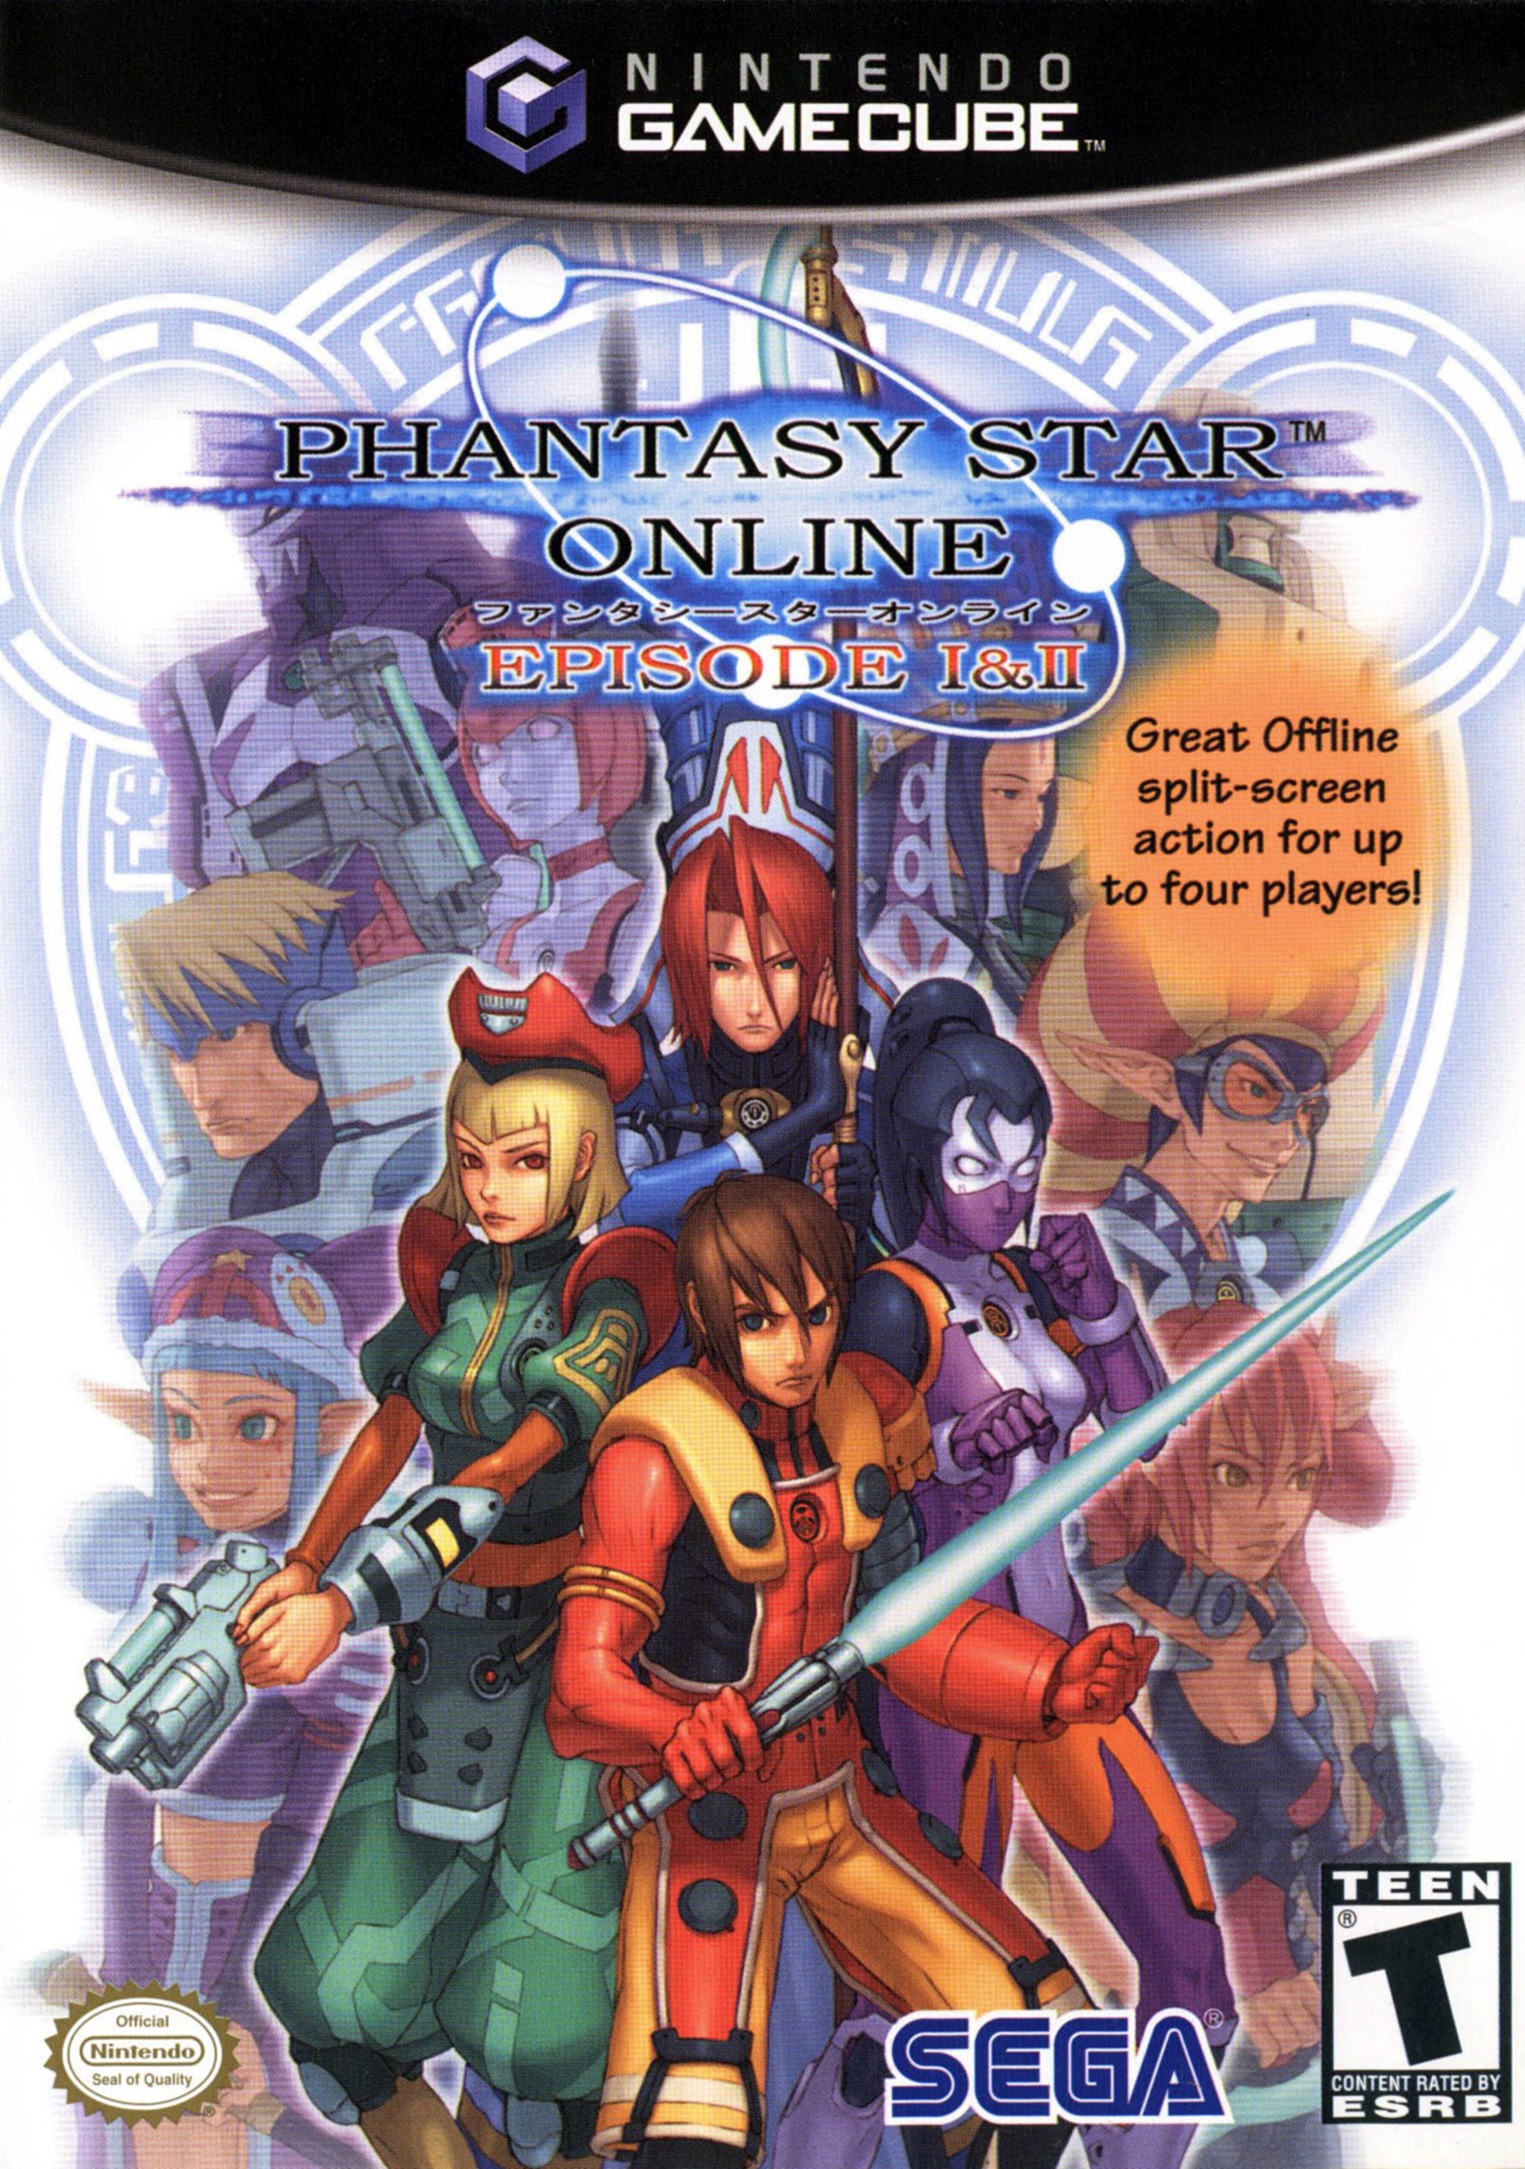 pso-episode-1-and-2-plus-action-replay-codes-146869-pso-episode-1-and-2-plus-action-replay-codes